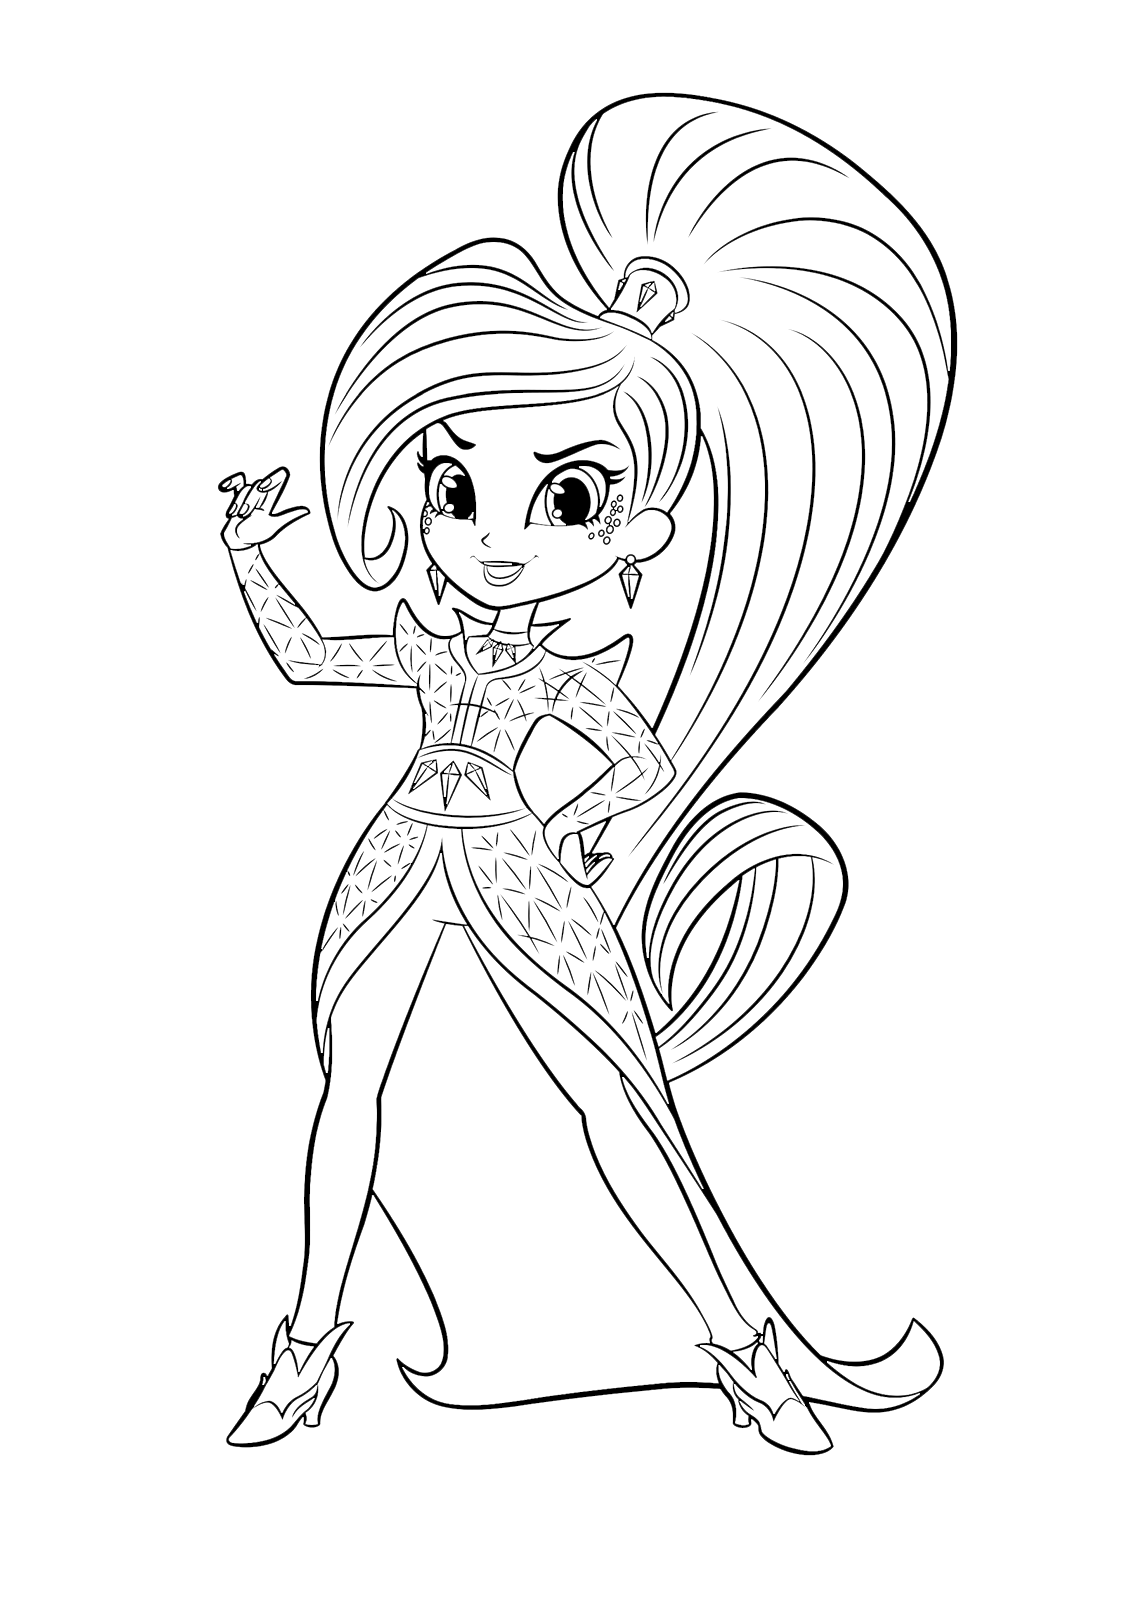 Shimmer and Shine - Zeta the enemy of Shimmer and Shine